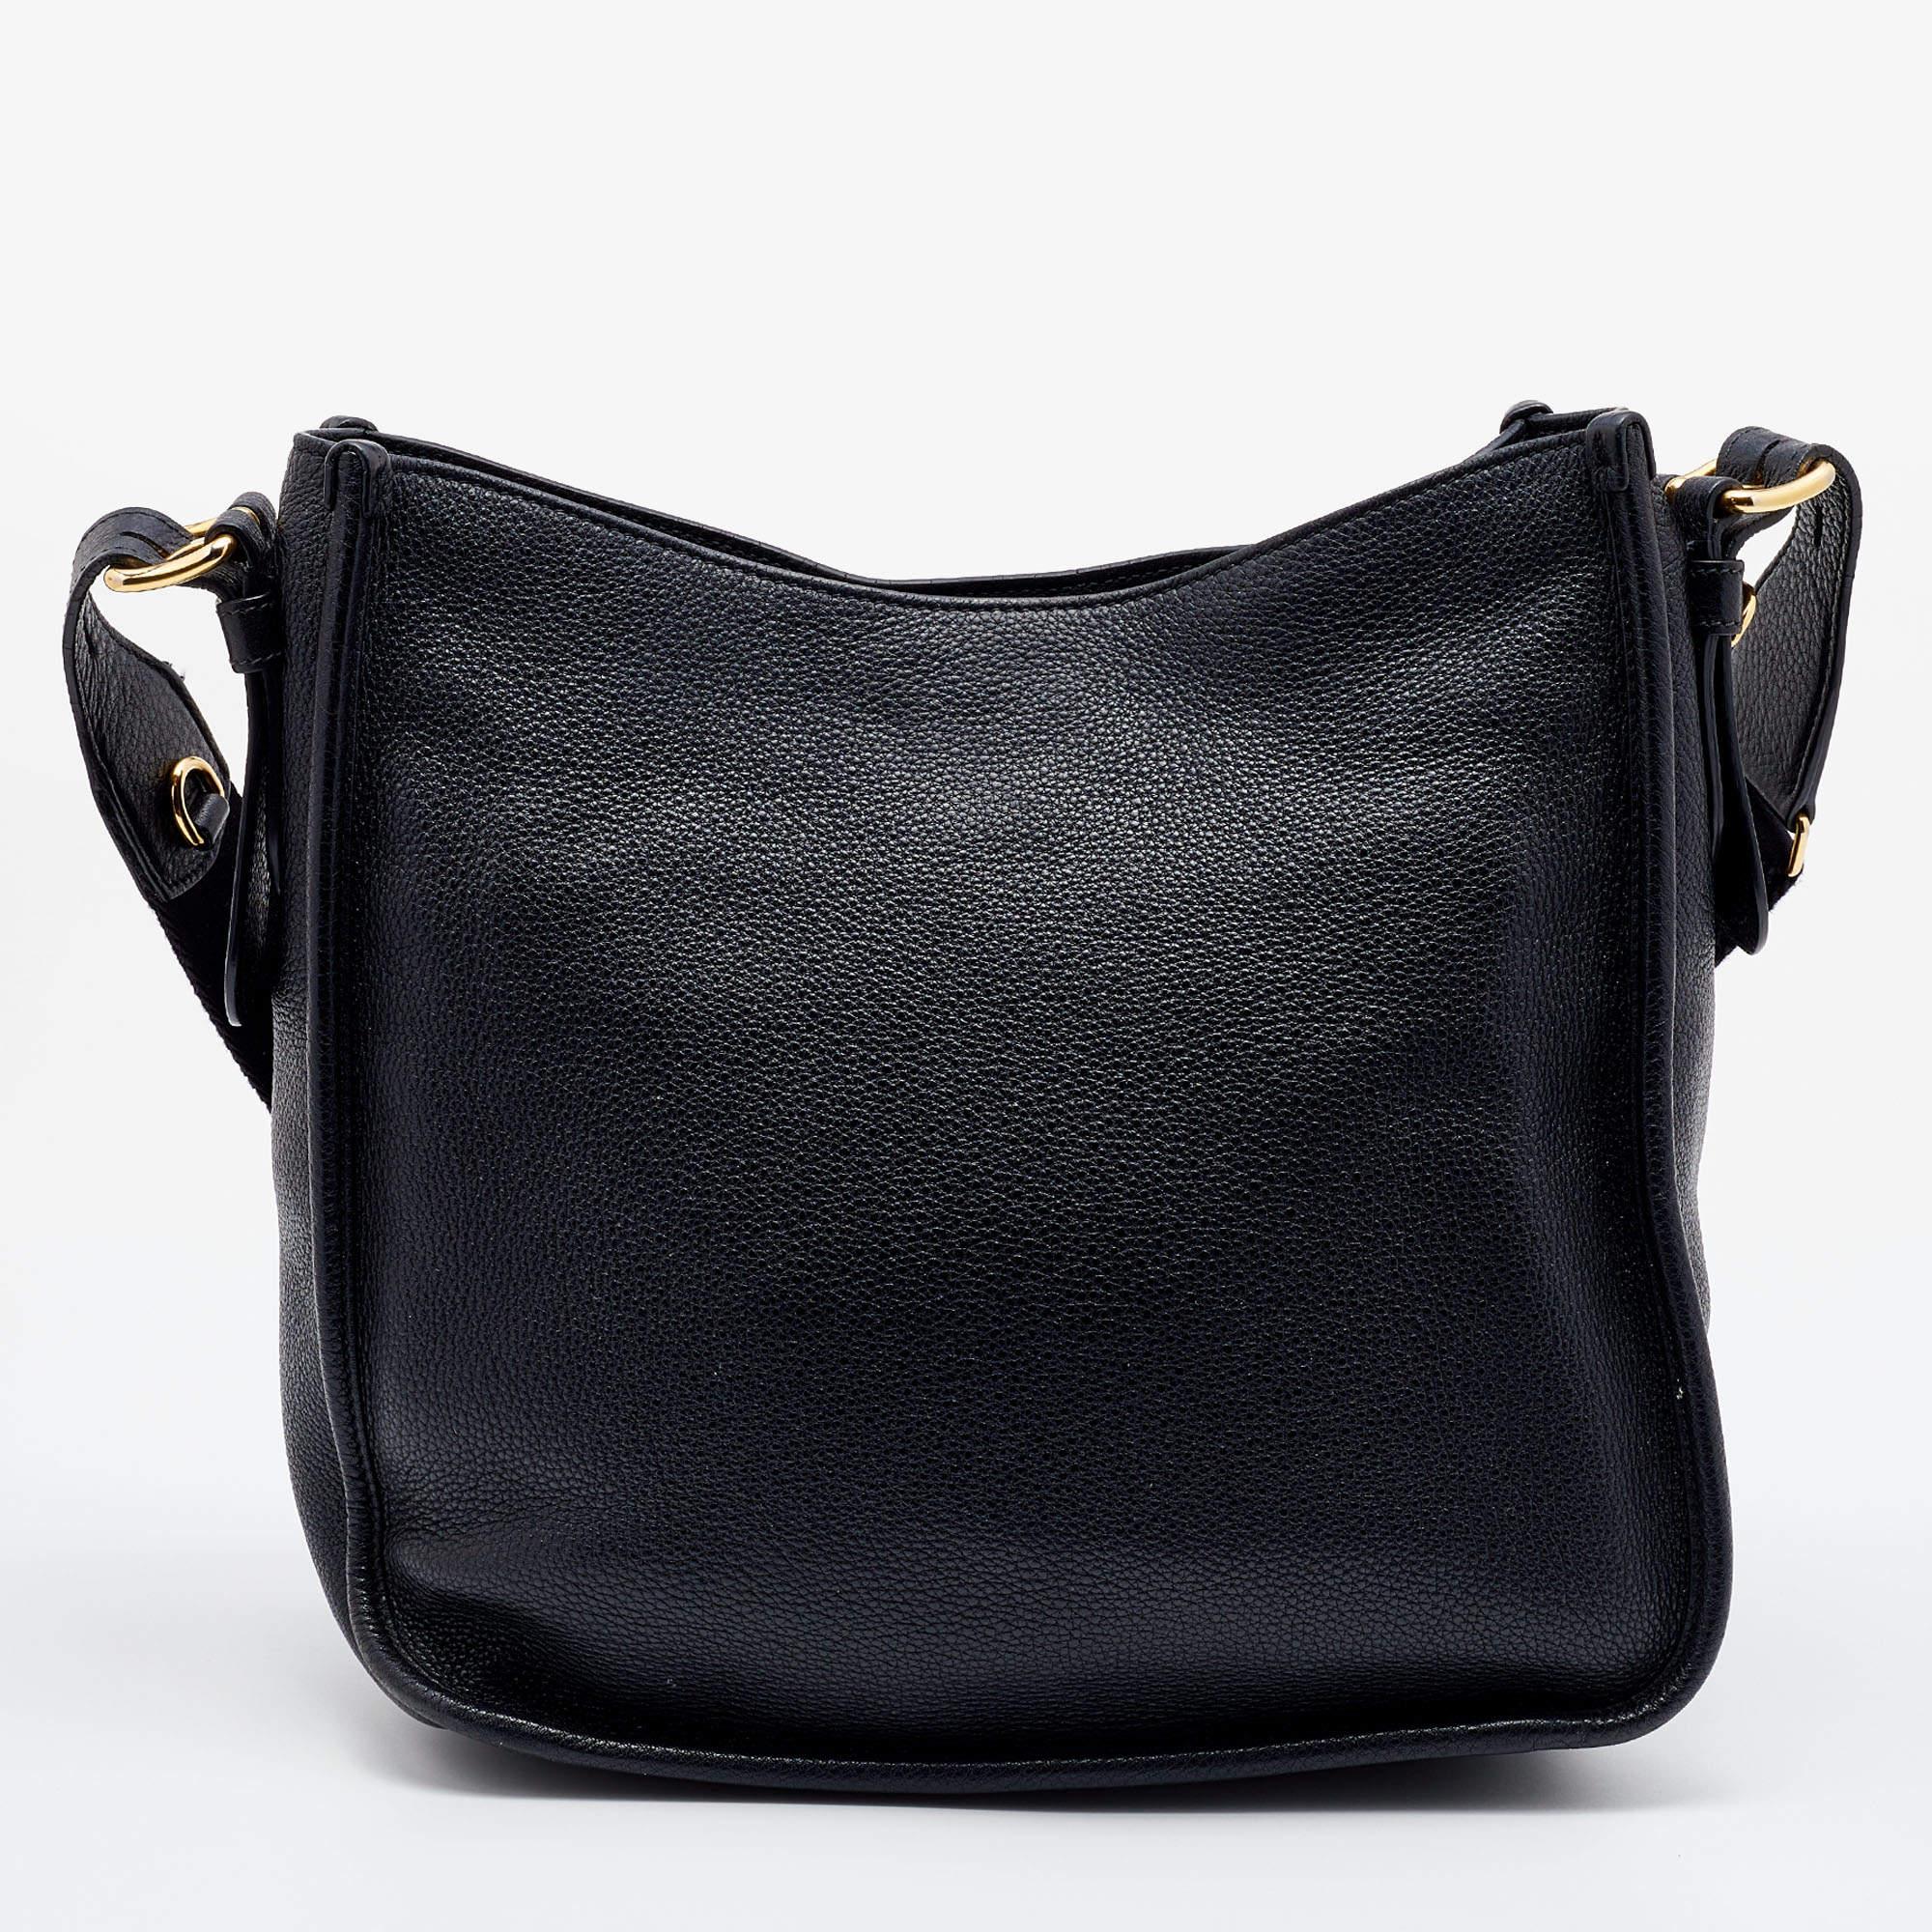 For a look that is complete with style, taste, and a touch of luxe, this designer bag is the perfect addition. Flaunt this beauty on your shoulder and revel in the taste of luxury it leaves you with.

Includes: Original Dustbag, Authenticity Card,